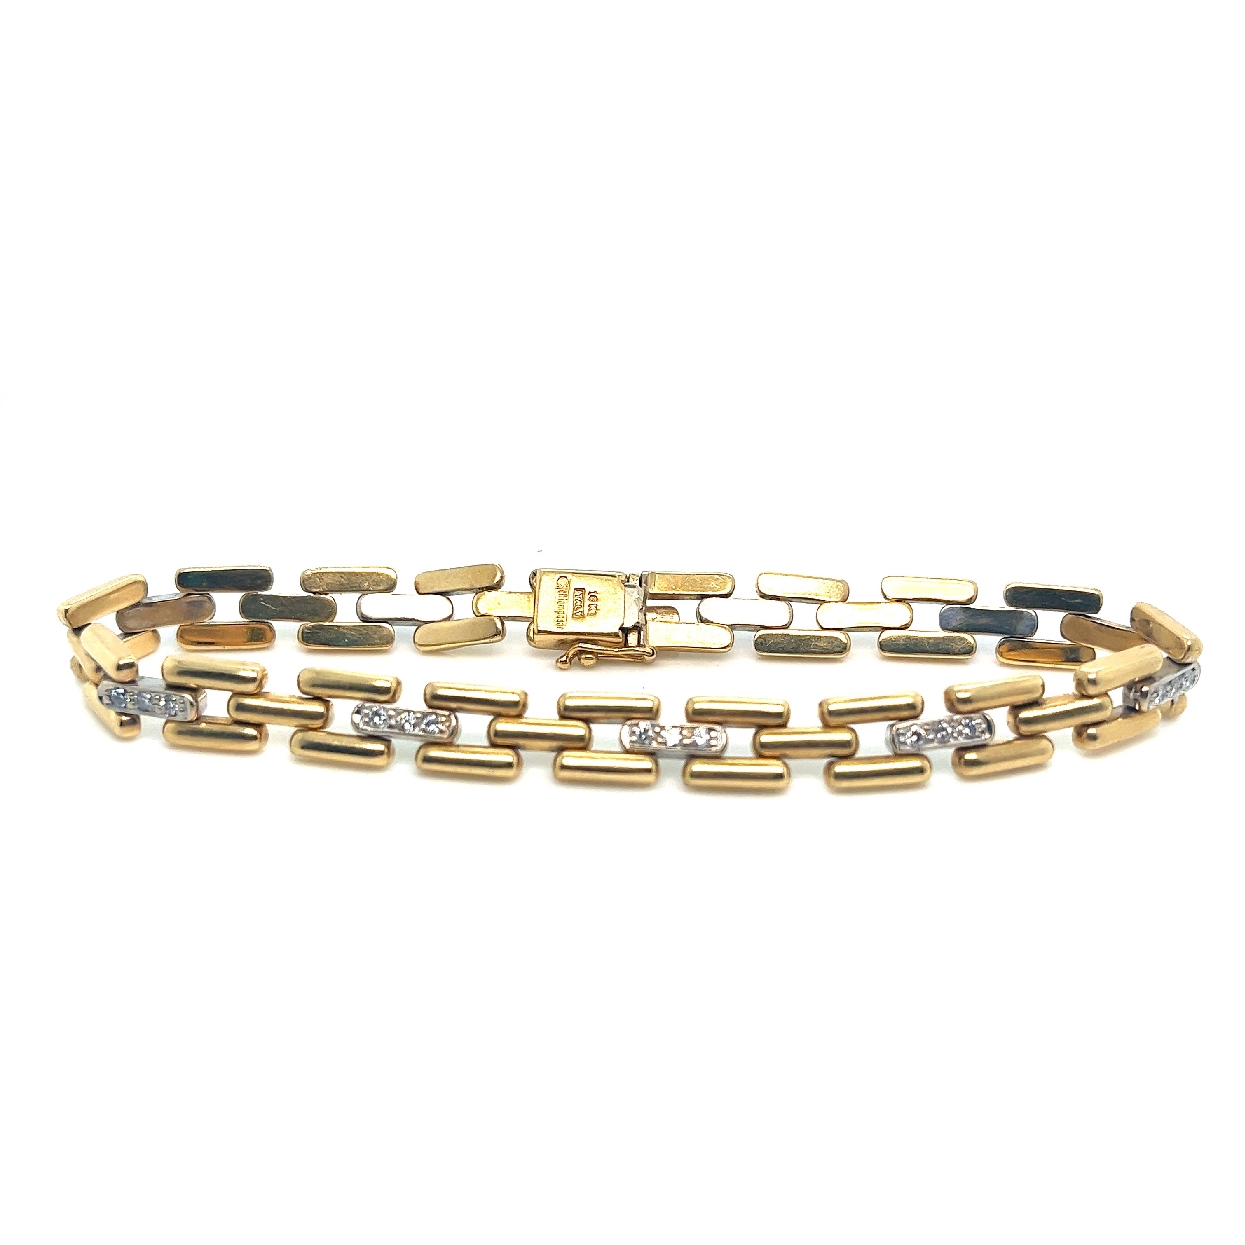 18K Yellow Gold Square Link Bracelet with Diamond Links 

8 Inches